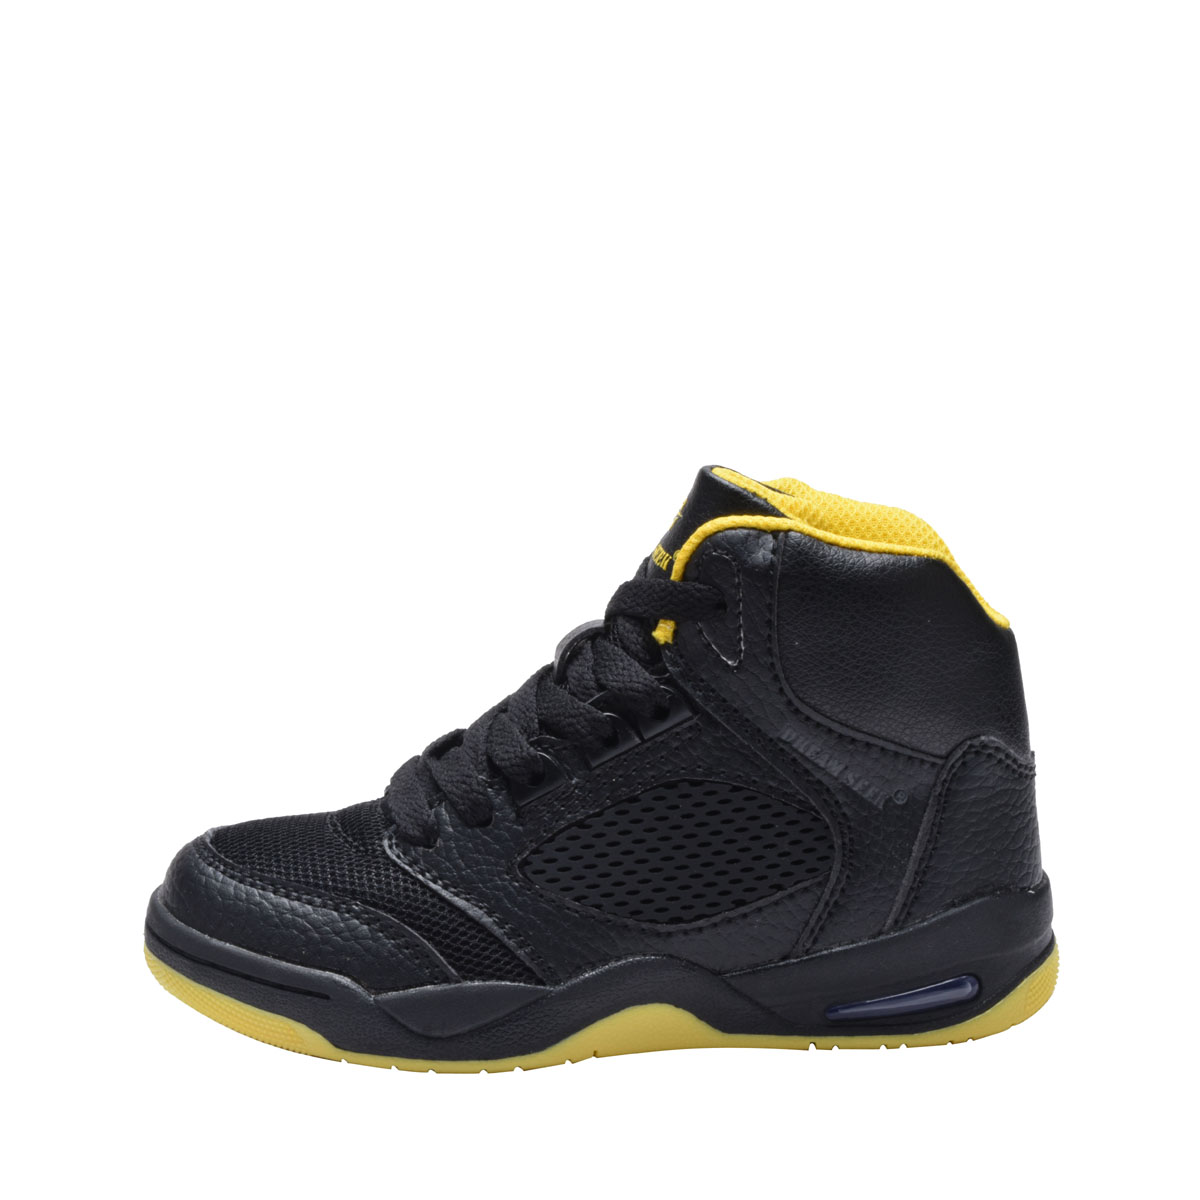 Boys' Basketball Sneakers High Top Kids Shoes - 3 Colors Beige/Black, Black/Red or Black/Yellow - Sizes 10-4 - image 3 of 6